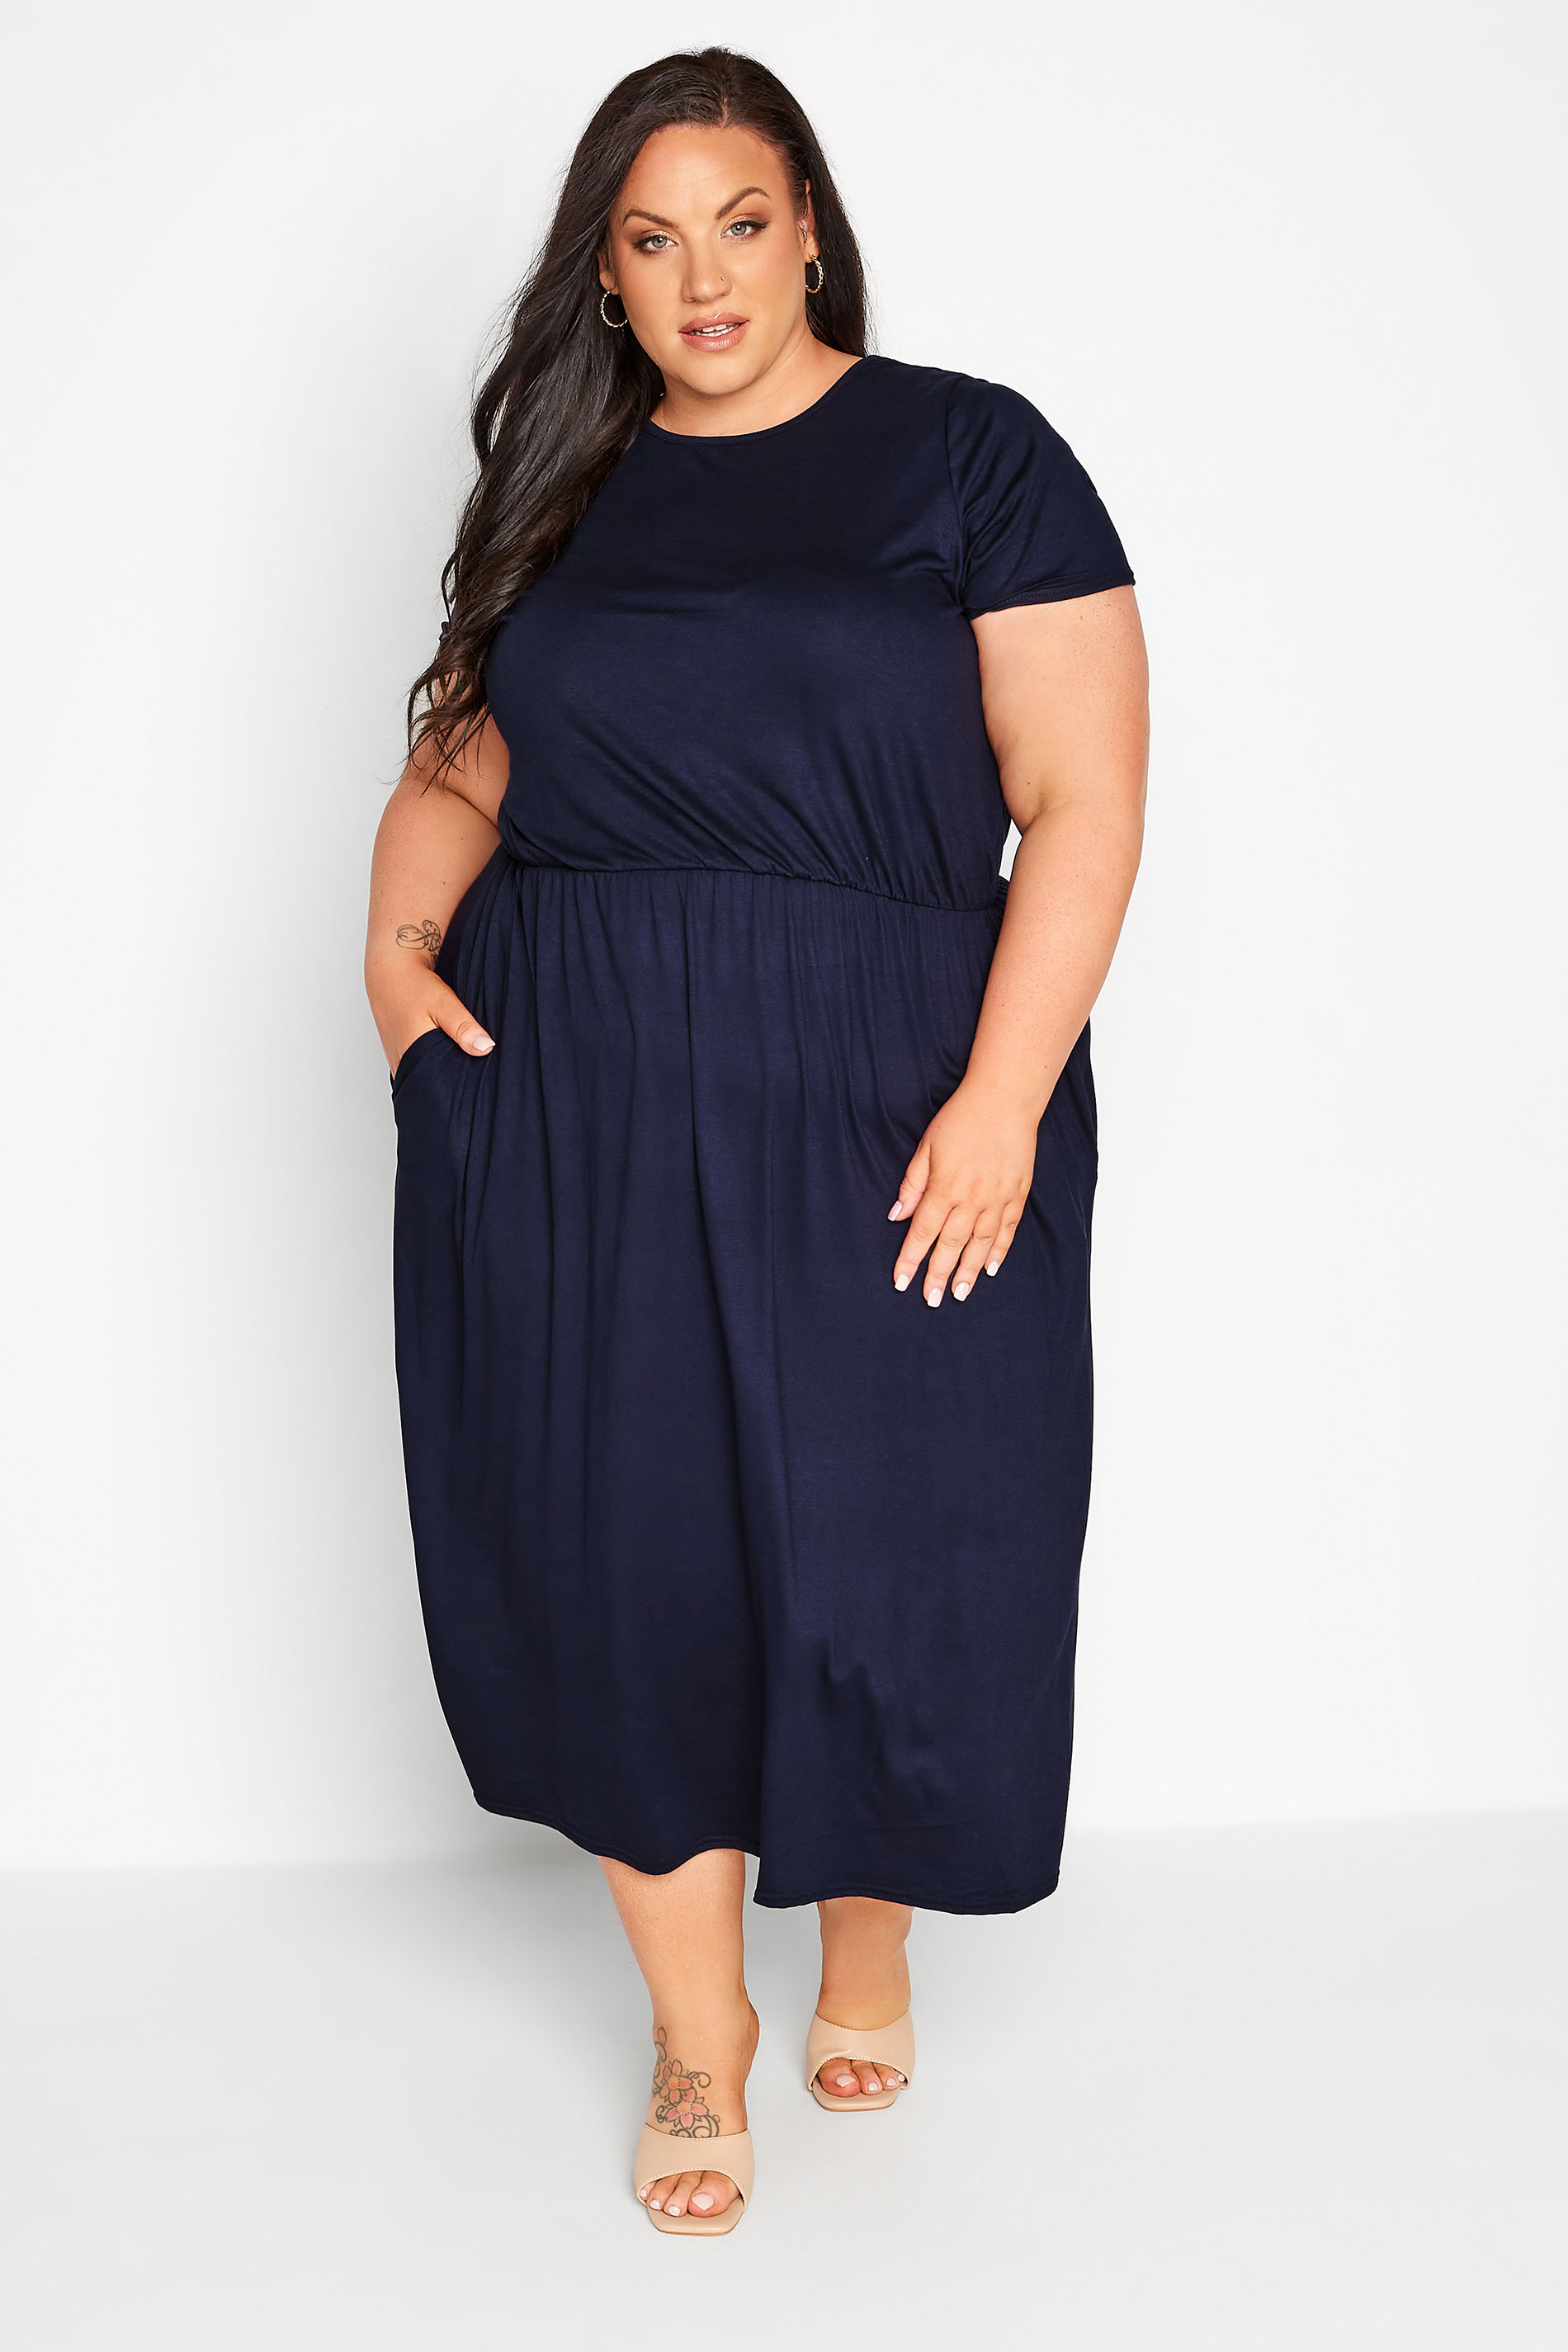 YOURS LONDON Navy Blue Pocket Maxi Dress | Yours Clothing 1